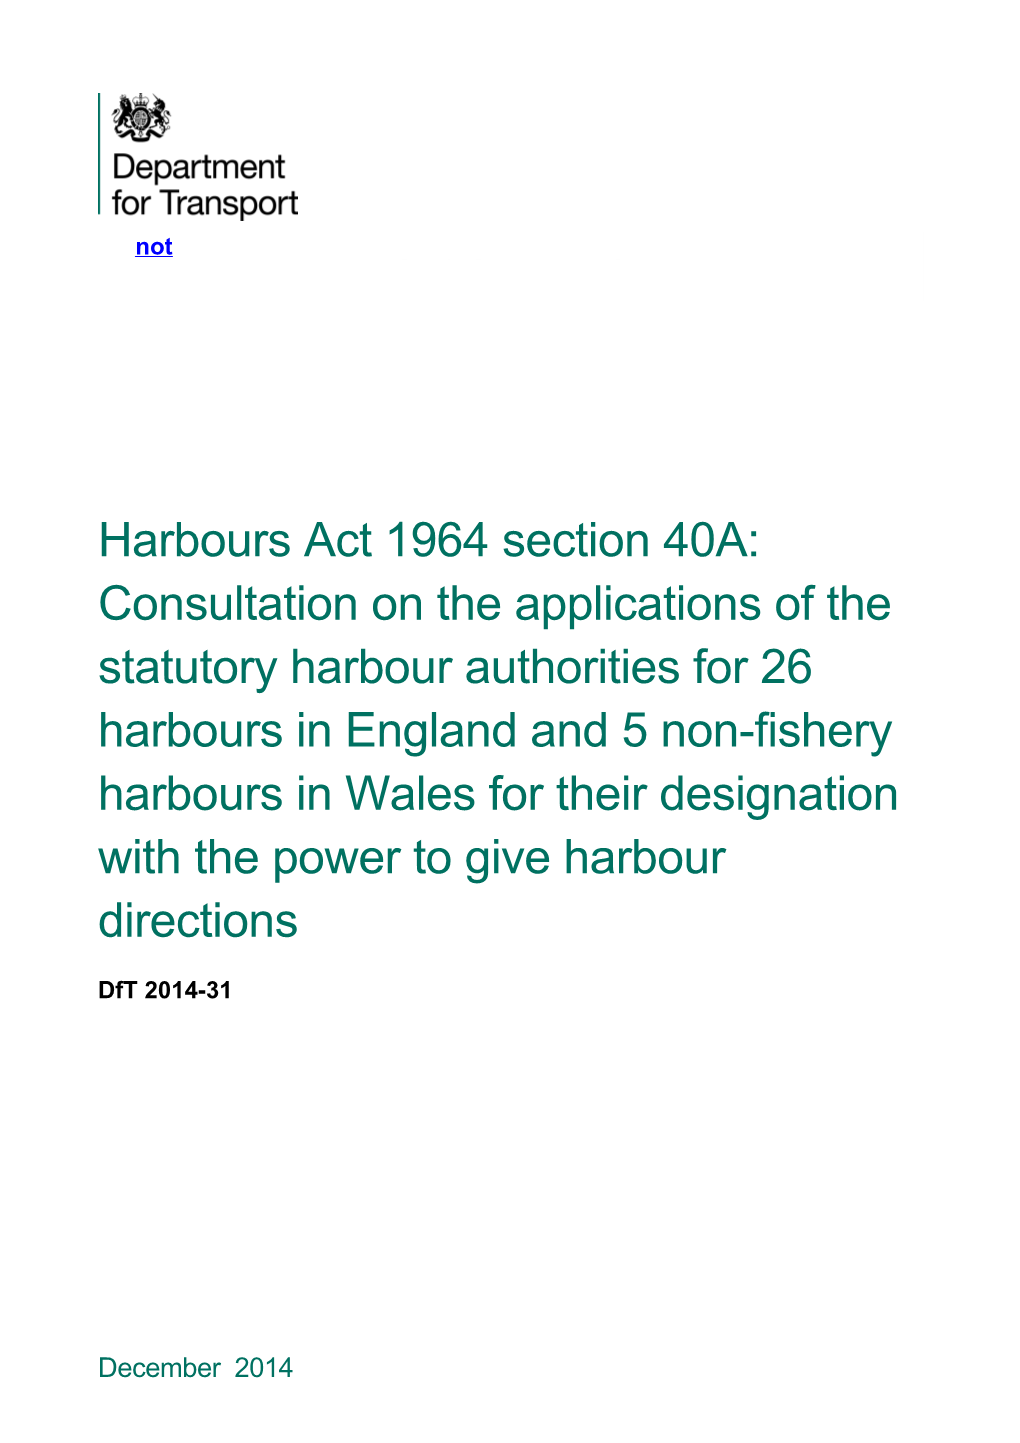 Harbours Act 1964 Section 40A: Consultation on the Applications of the Statutory Harbour